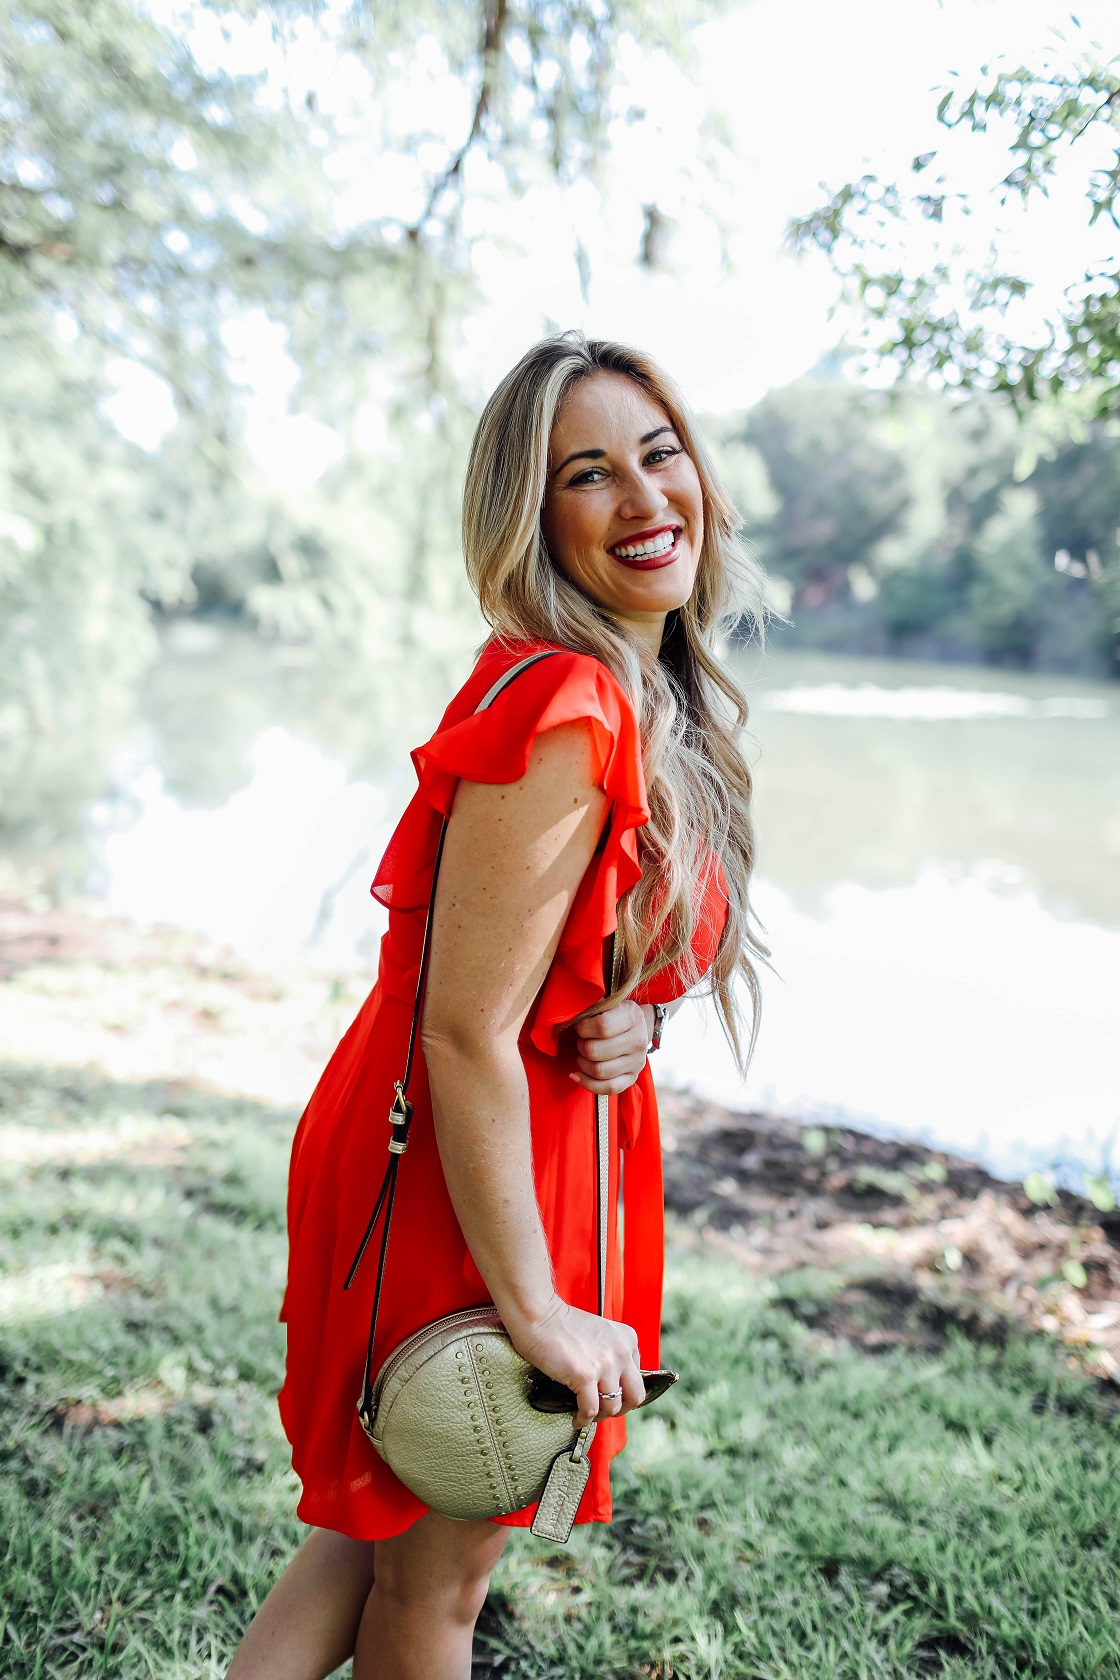 Cute summer dresses featured by popular fashion blogger, Walking in Memphis in High Heels: Socialite red ruffle sleeve dress